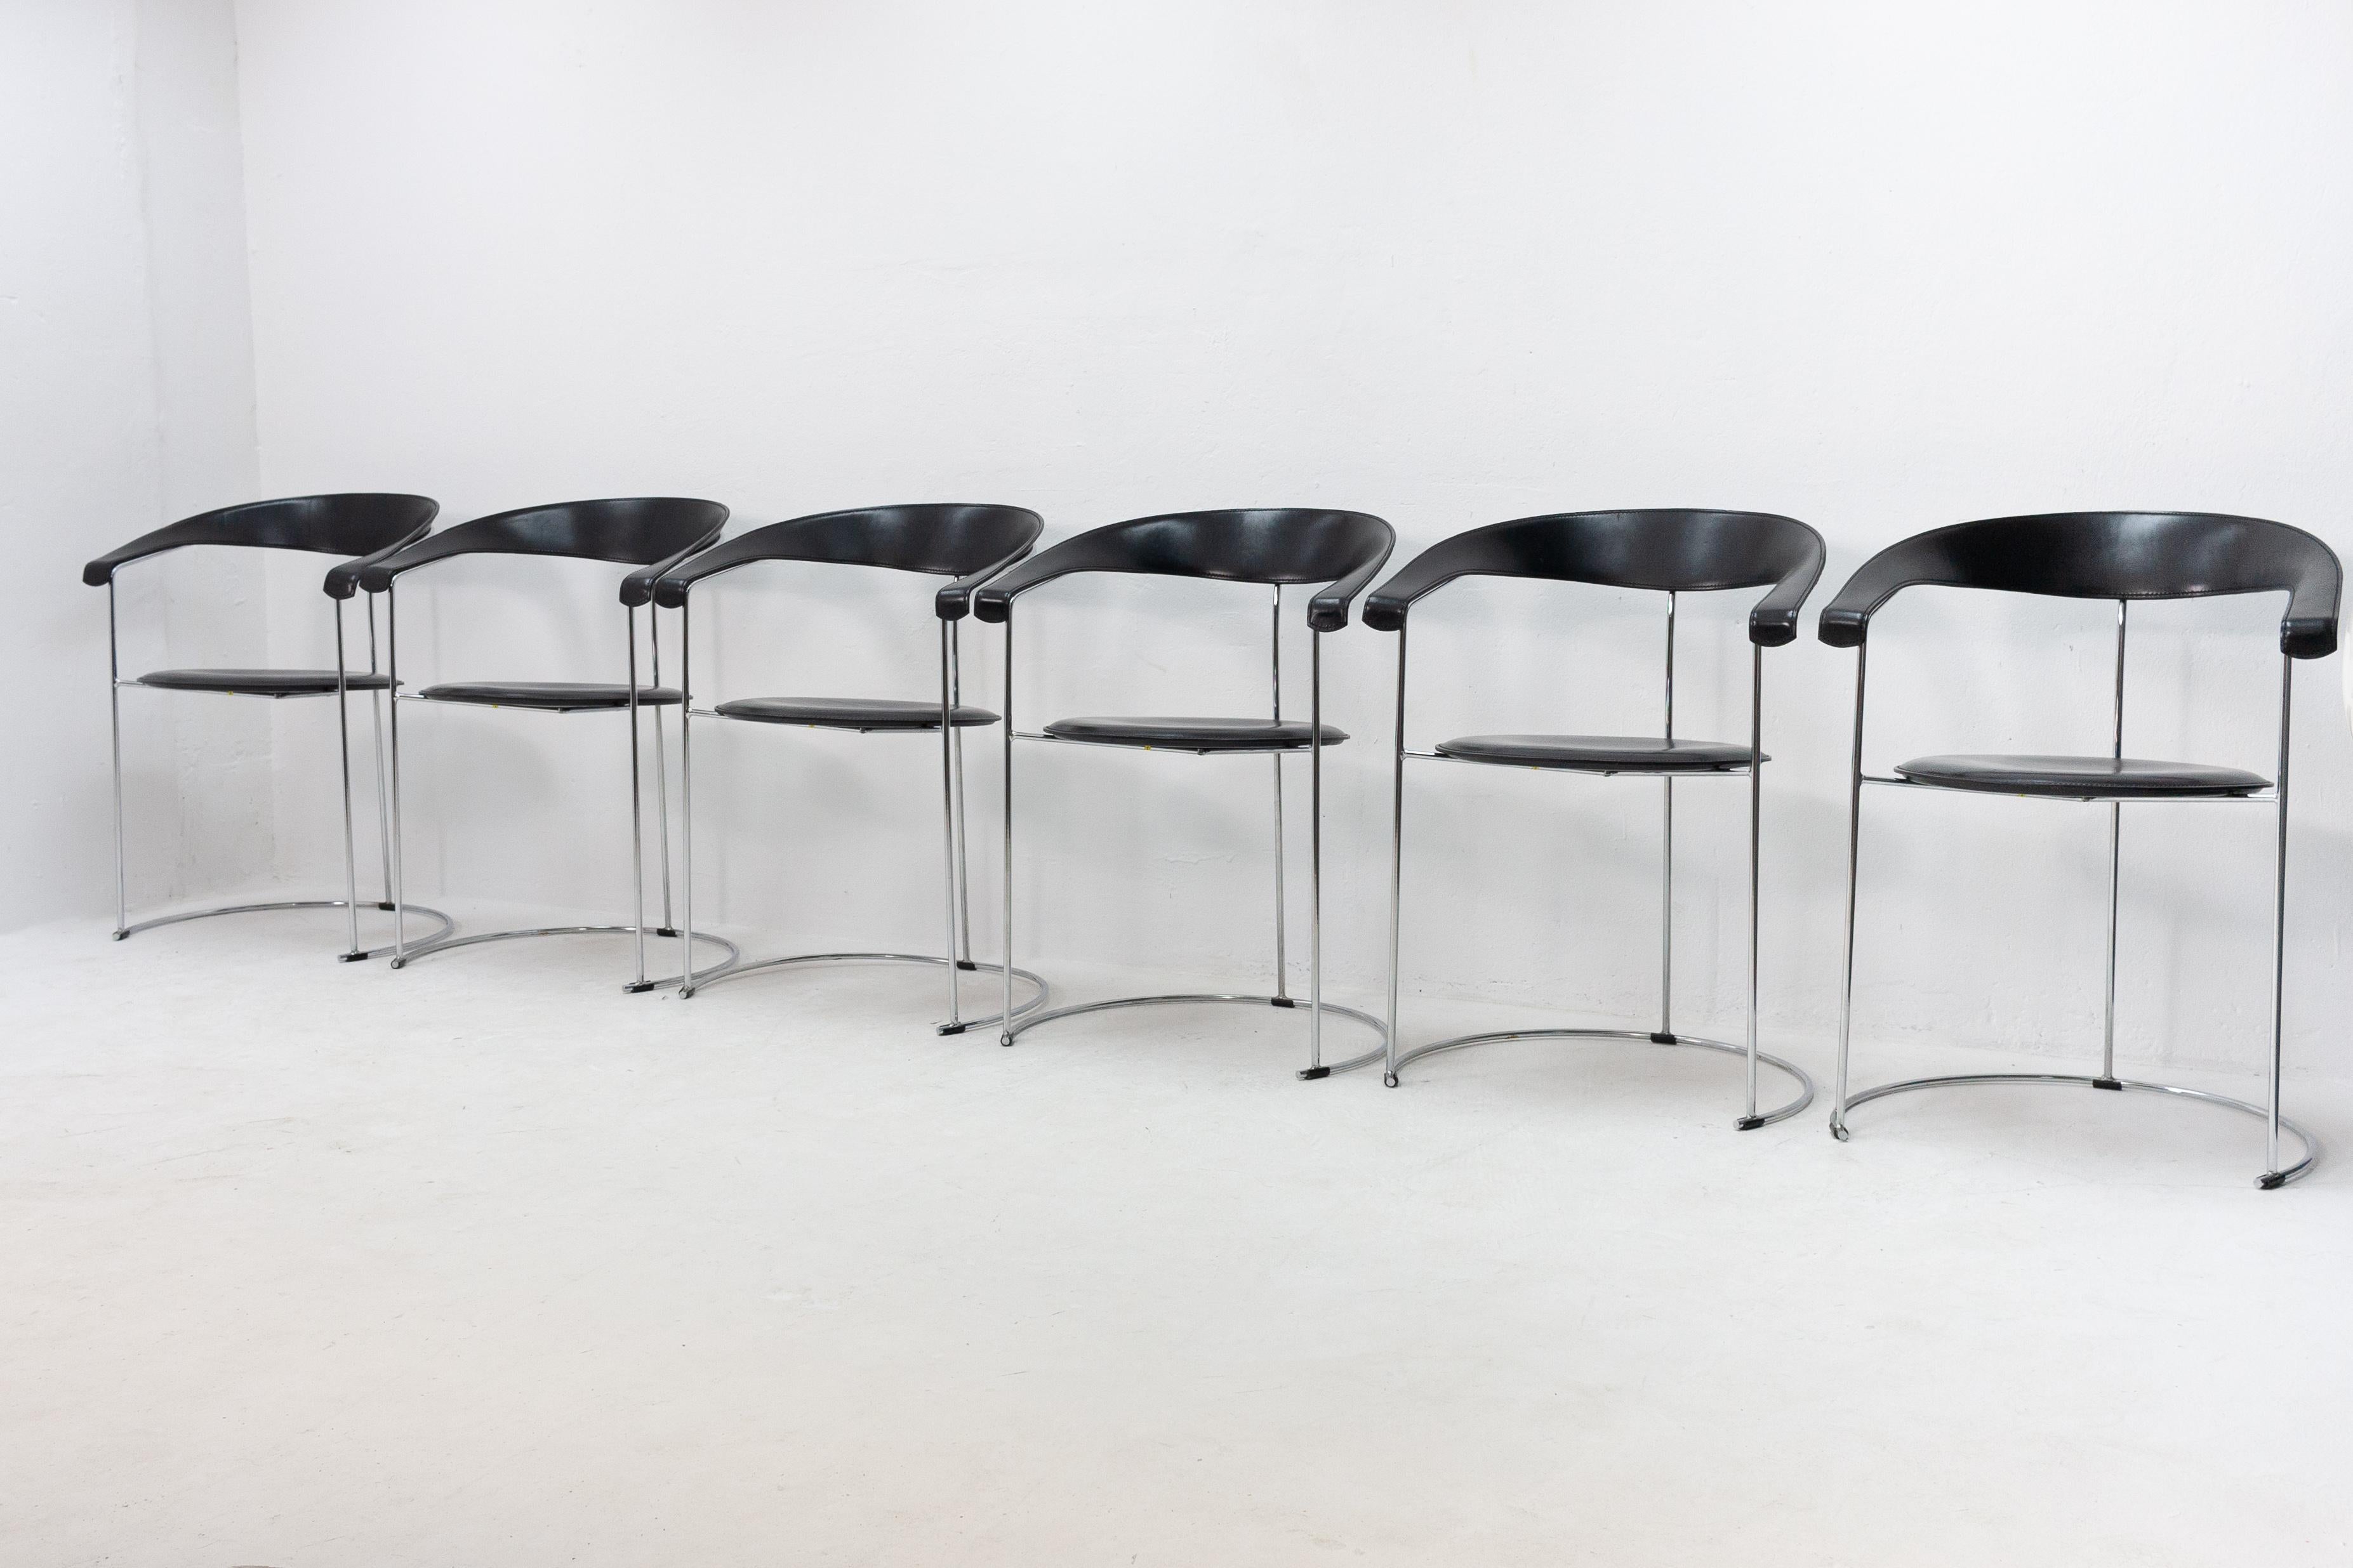 A unique change to acquirer 6 Arrben Canasta chairs .All 6 in a superb condition .These are the first generation off the Arrben chairs .Metal chrome with black saddle leather seat and back Carpe Articulum Interior and Decorative Antiques has